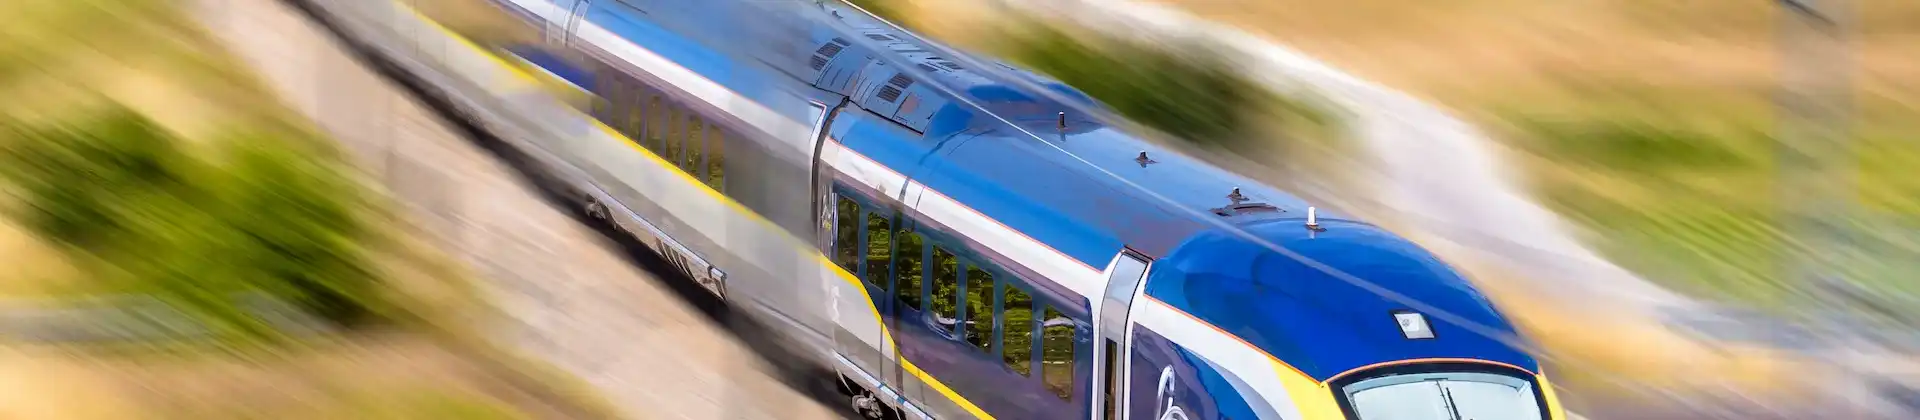 Eurostar confirms that direct trains between London and Disneyland will be suspended next year